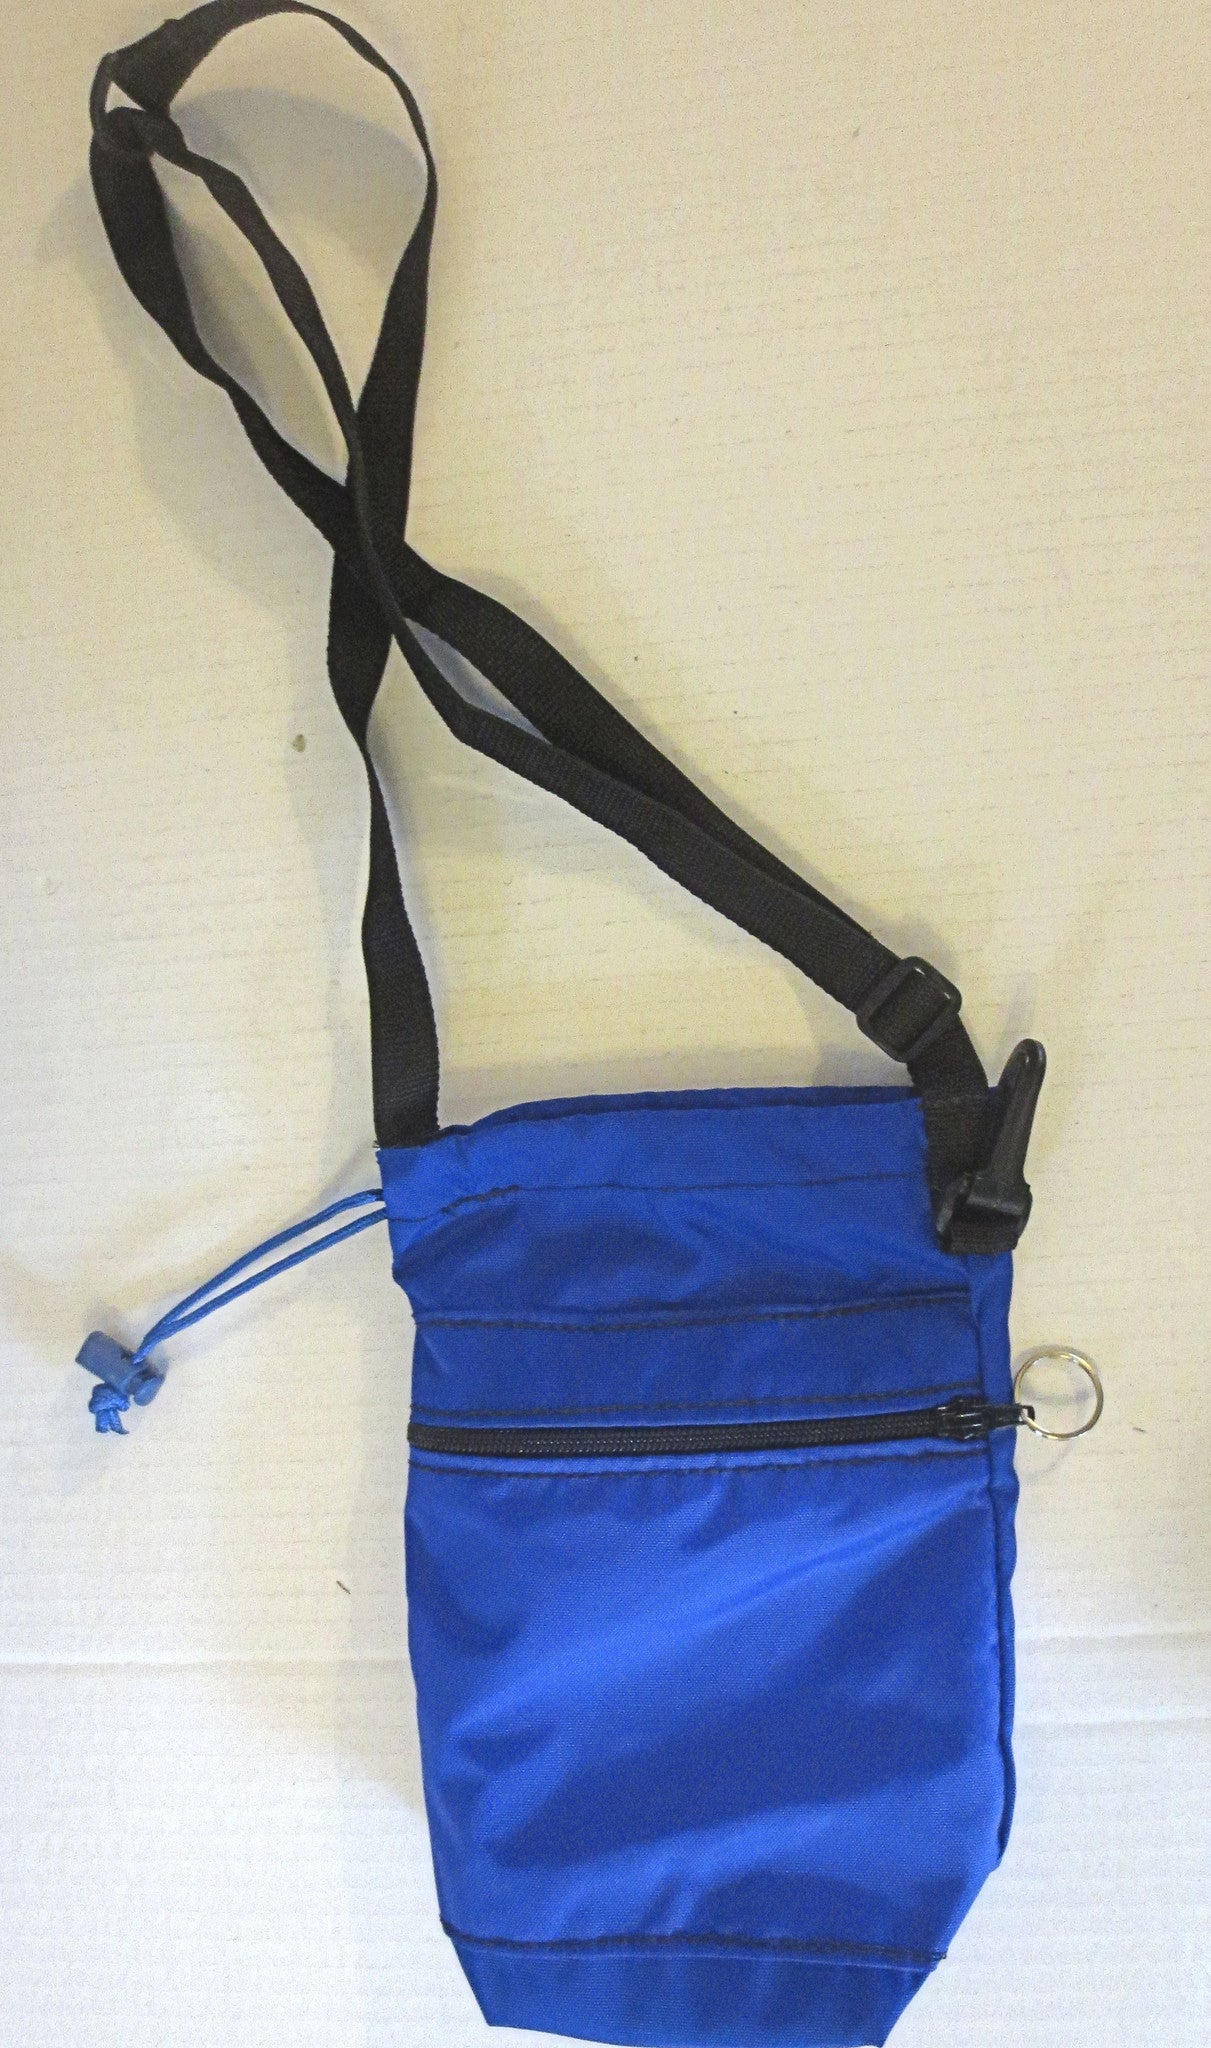 water bottle bag adjustable sling styling great for travel, on the go, staying hydrated royal blue / outer zippered pocket